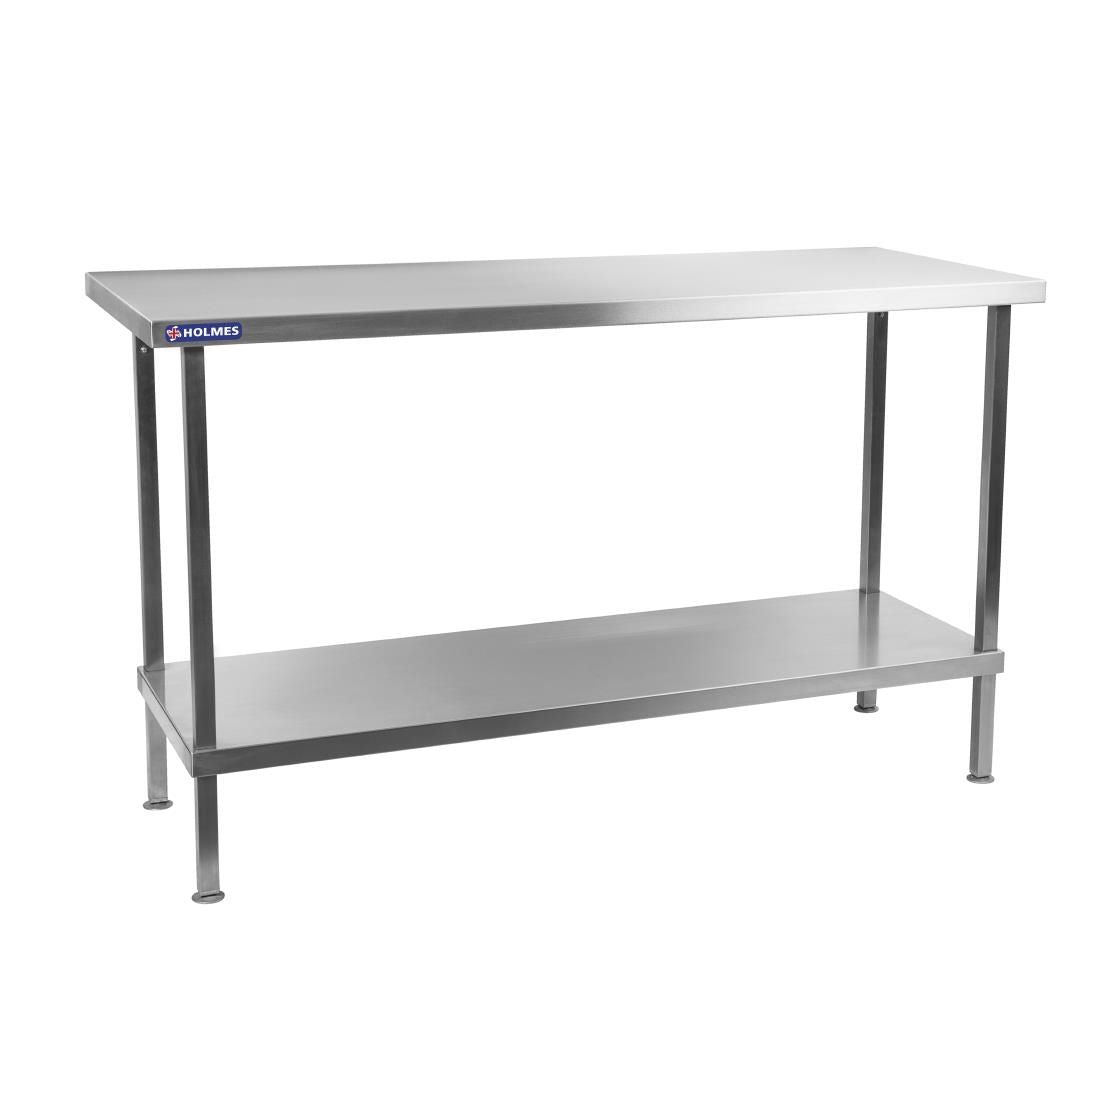 Holmes Stainless Steel Centre Table 900mm - DR042